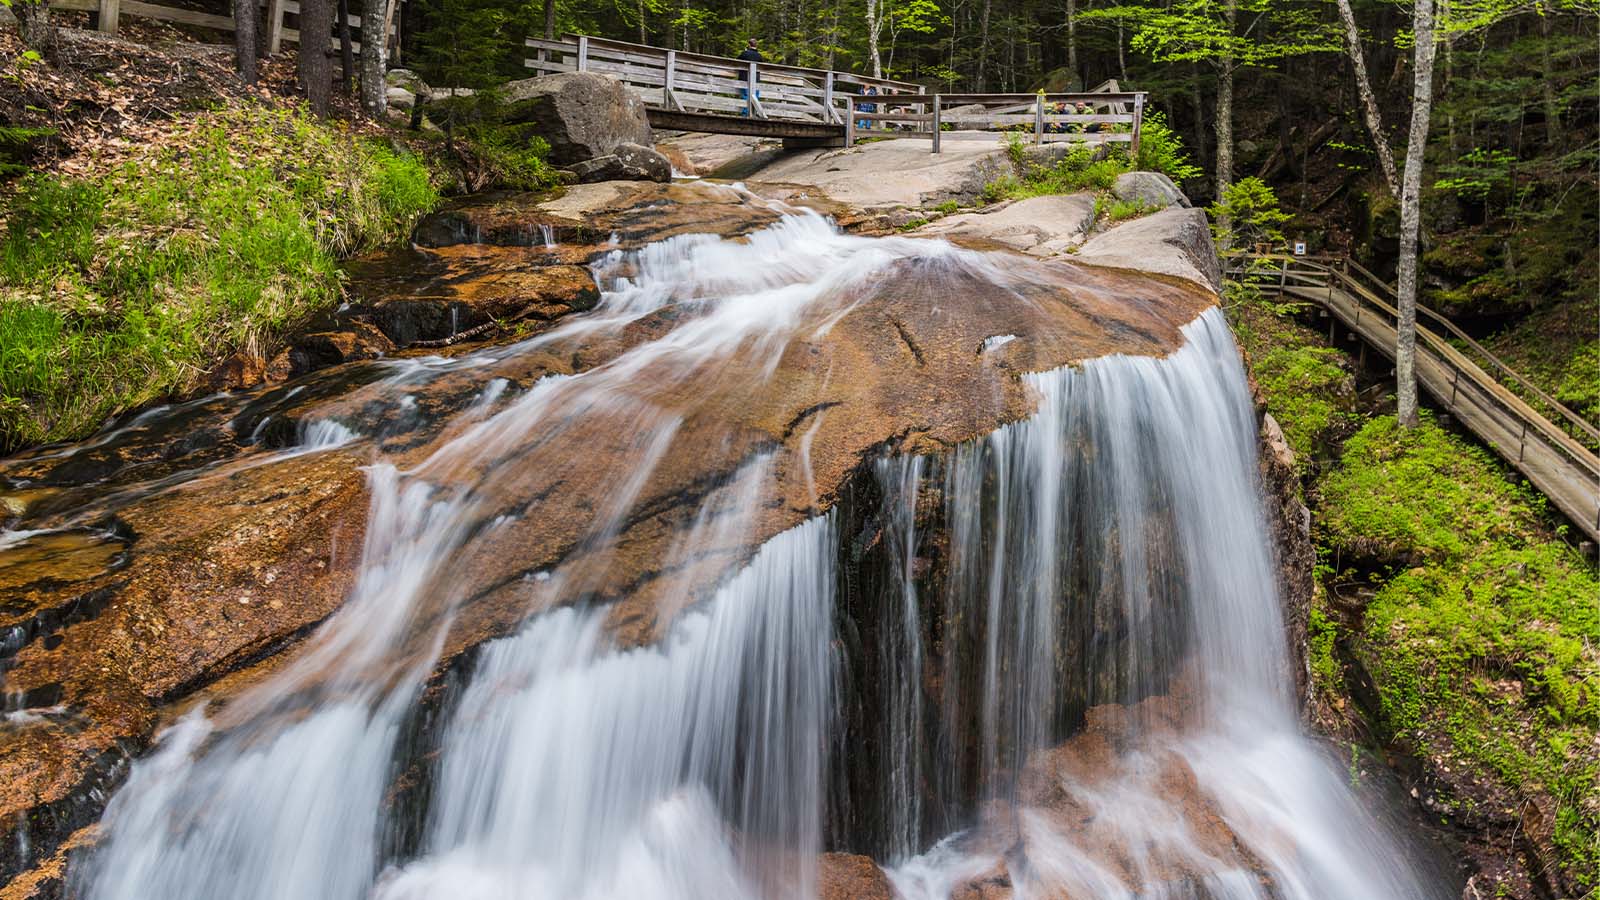 NH-AVALANCHE-FALLS-FLUME-GORGE-FRANCONIA-NOTCH-STATE-PARK